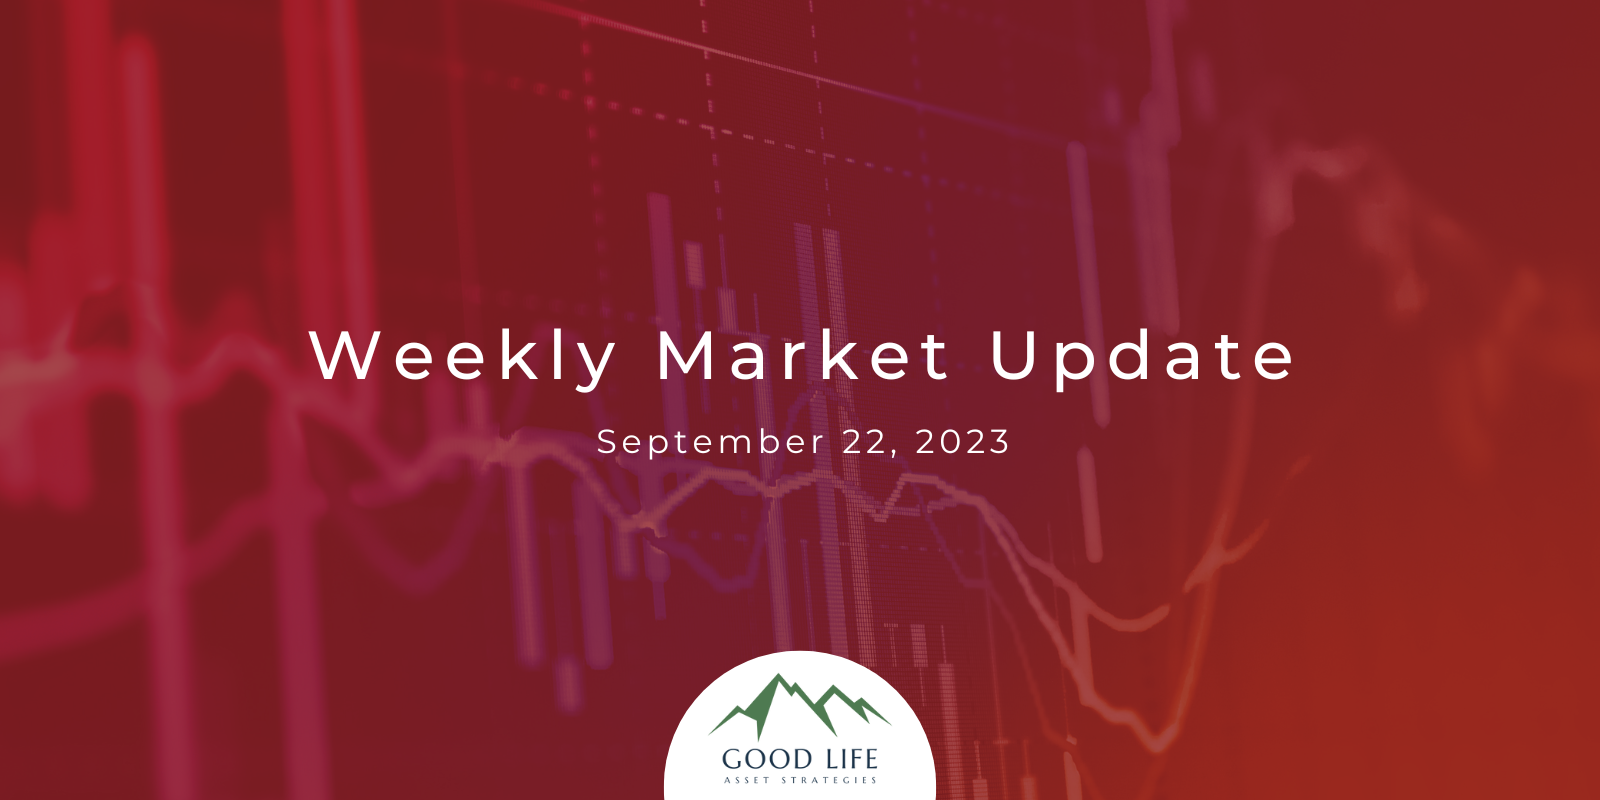 Weekly Market Update for September 22, 2023, from DeWayne Hall: Will the bulls break out at the end of the third business quarter?